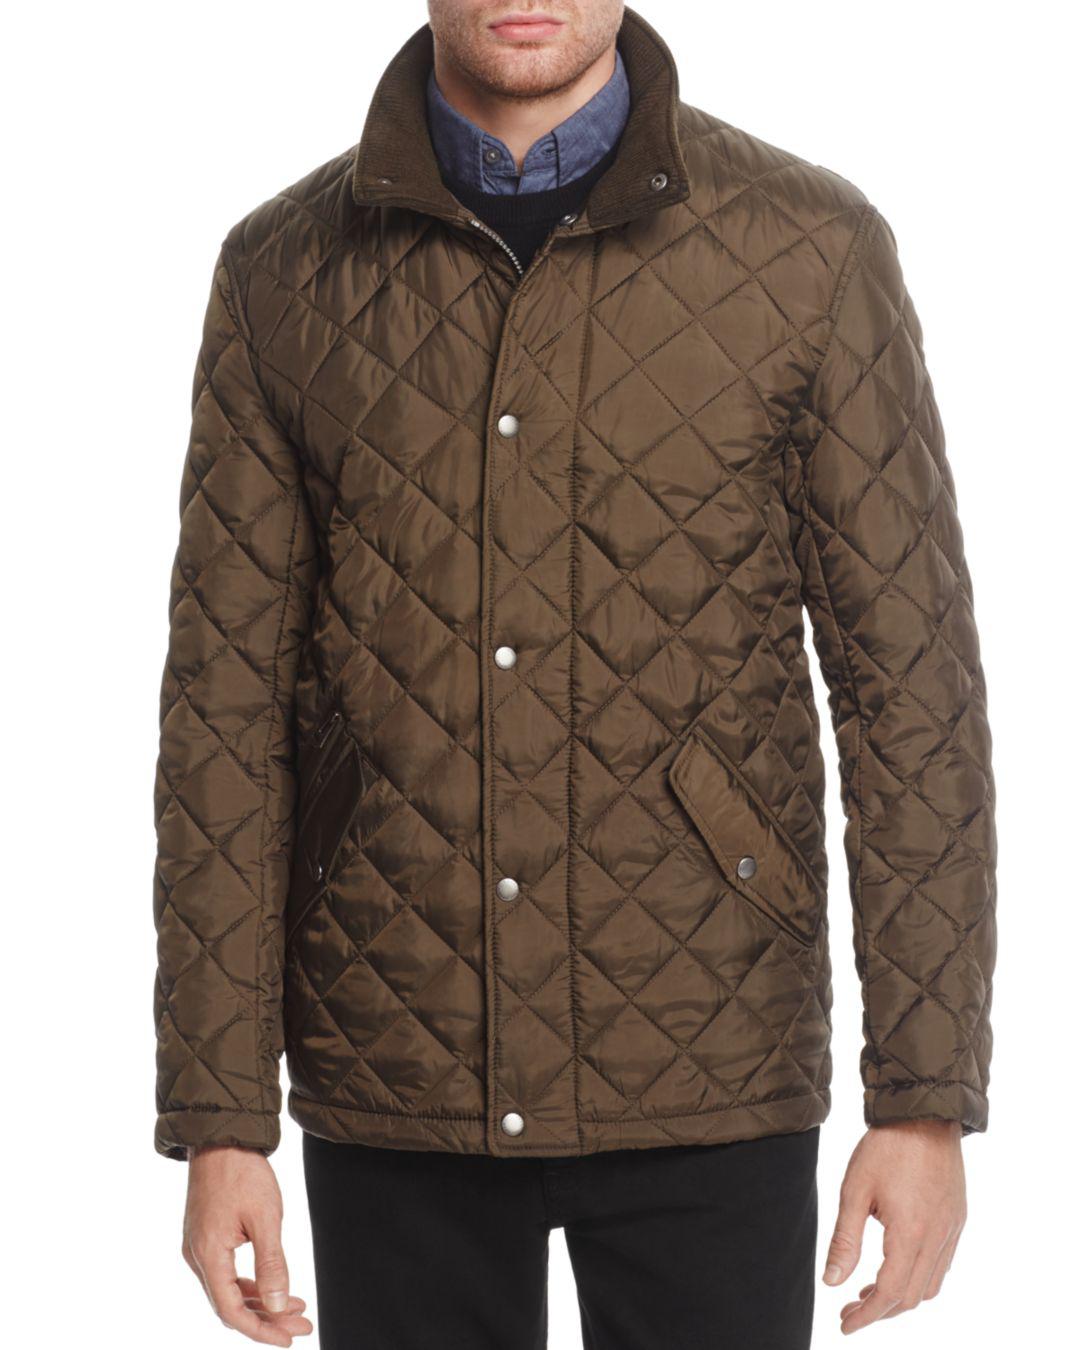 Lyst - Cole Haan Diamond Quilted Snap Jacket in Green for Men - Save 30